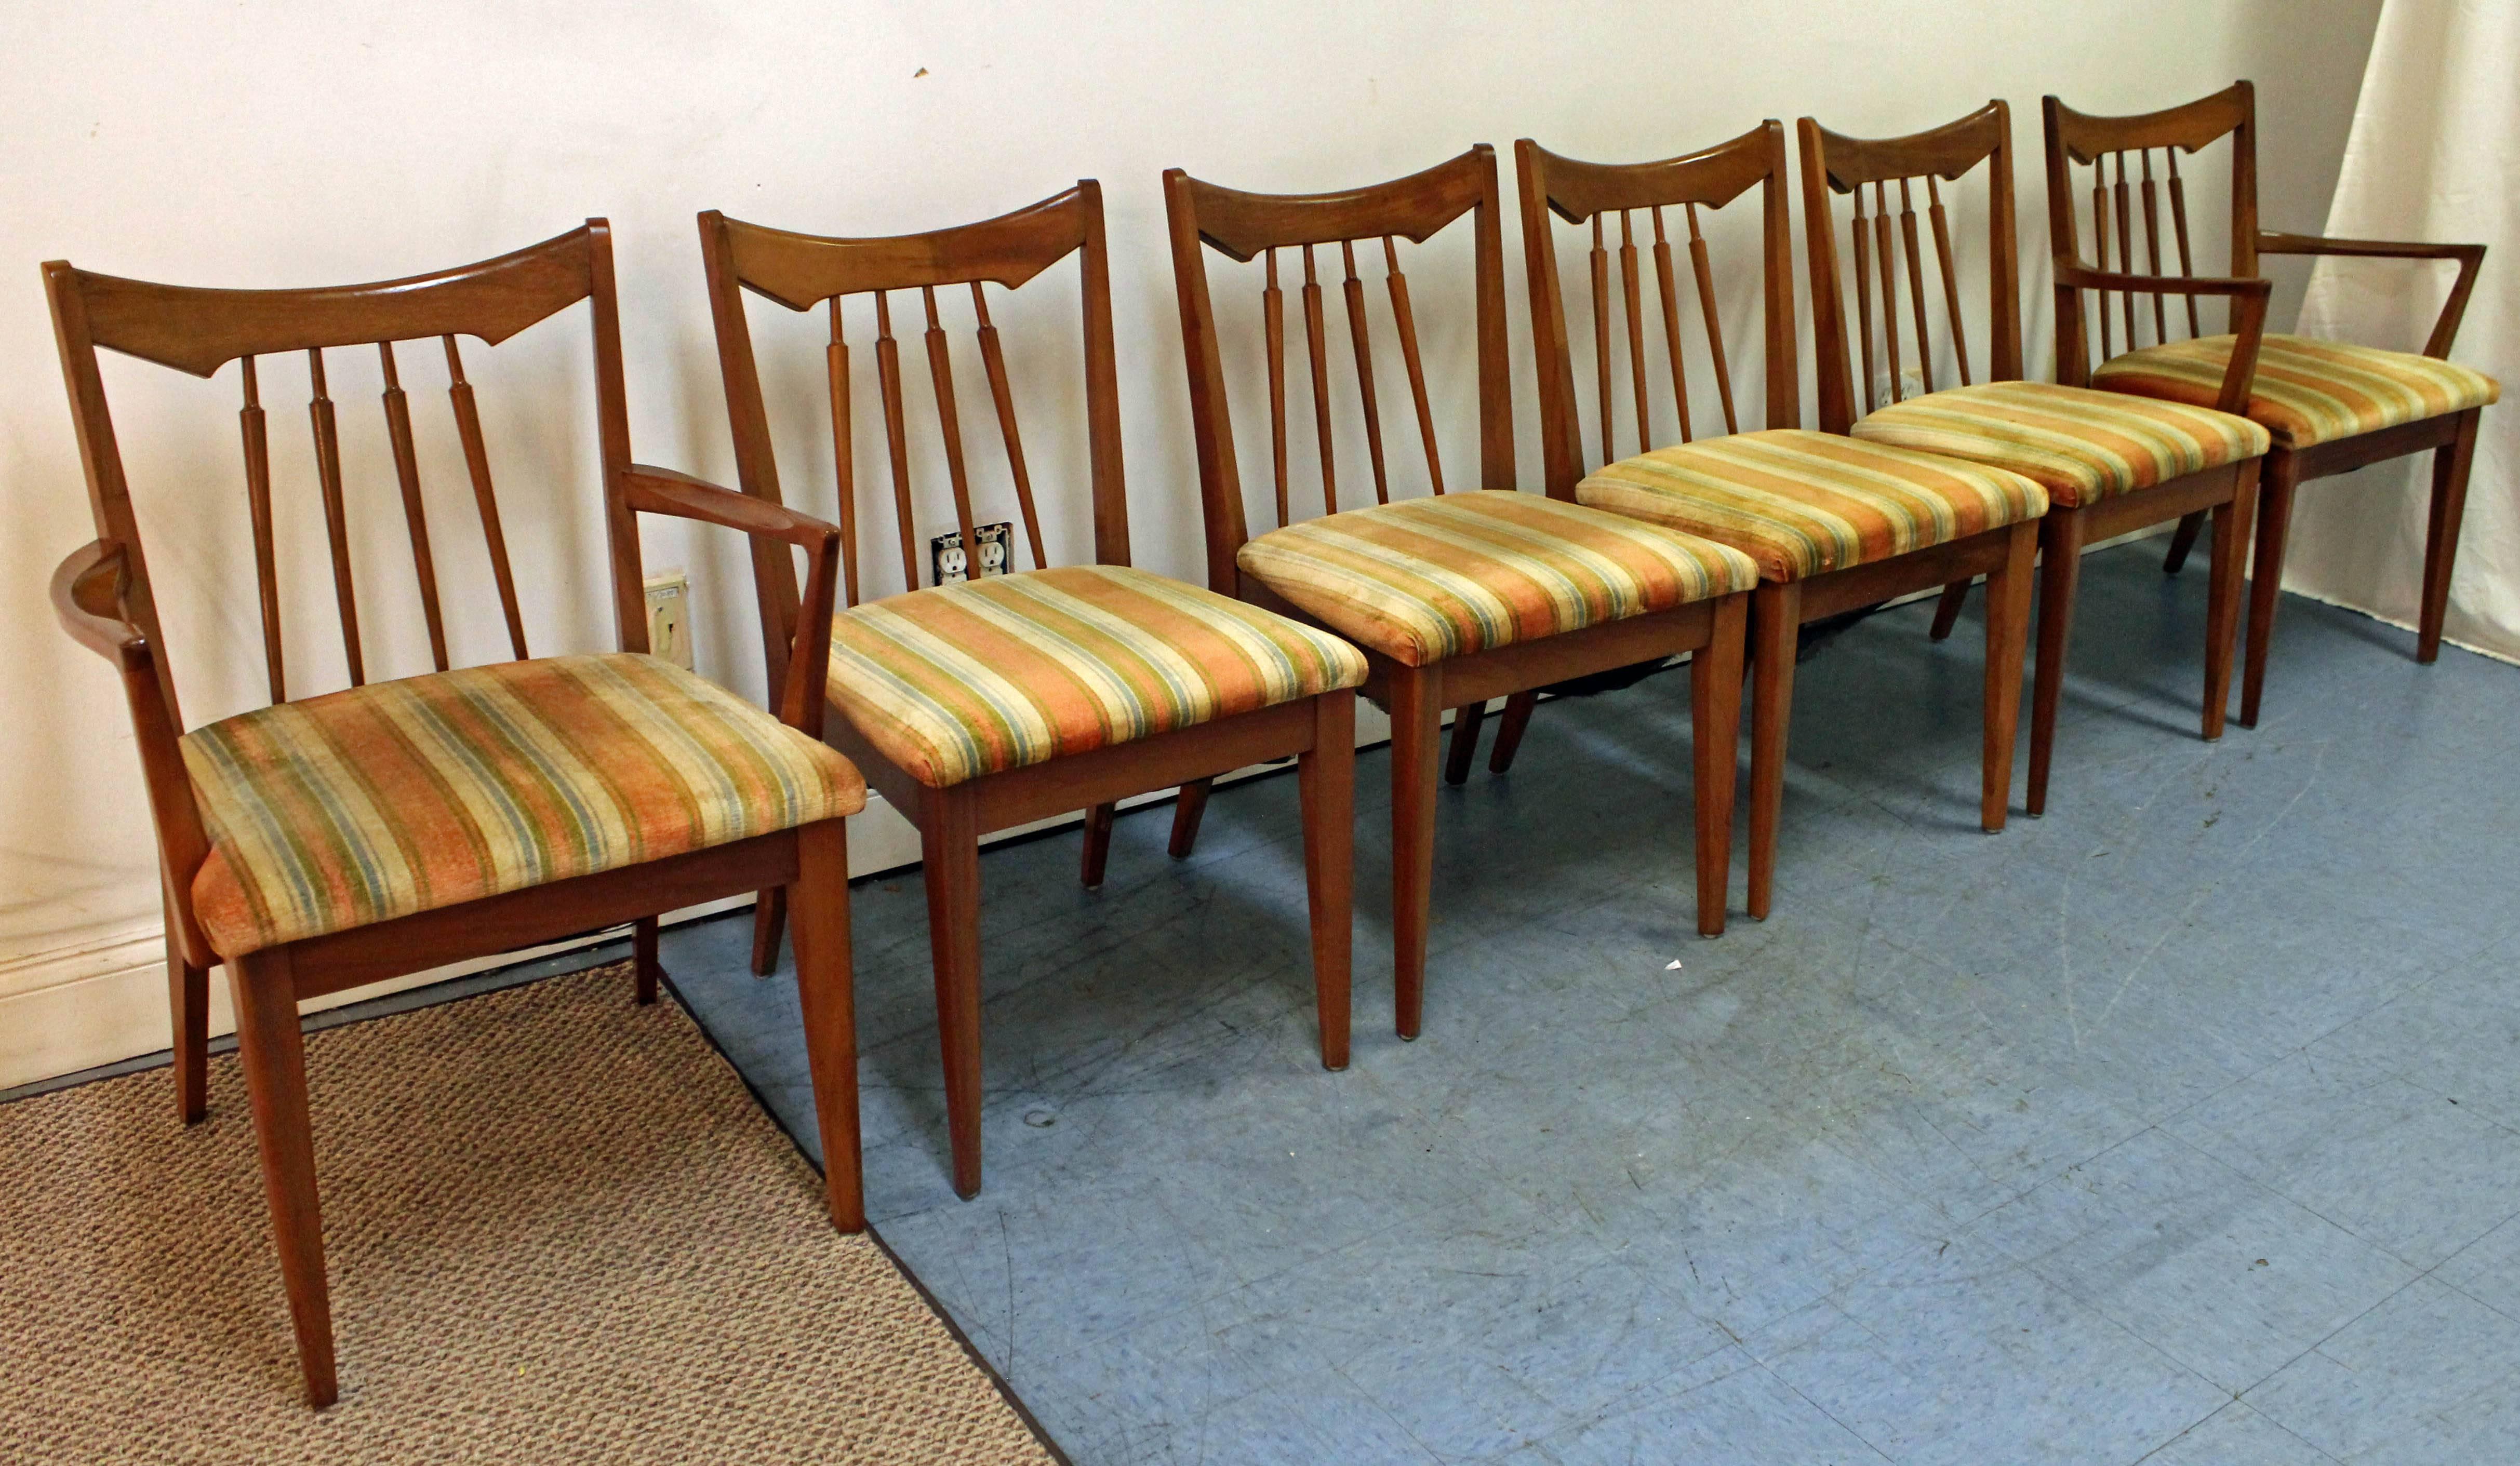 What a find. Offered is a Mid-Century Modern set of six dining chairs. This set includes four side chairs and two armchairs that are made of walnut with upholstered seats up. They are in decent condition, need to be reupholstered (some stains/tears